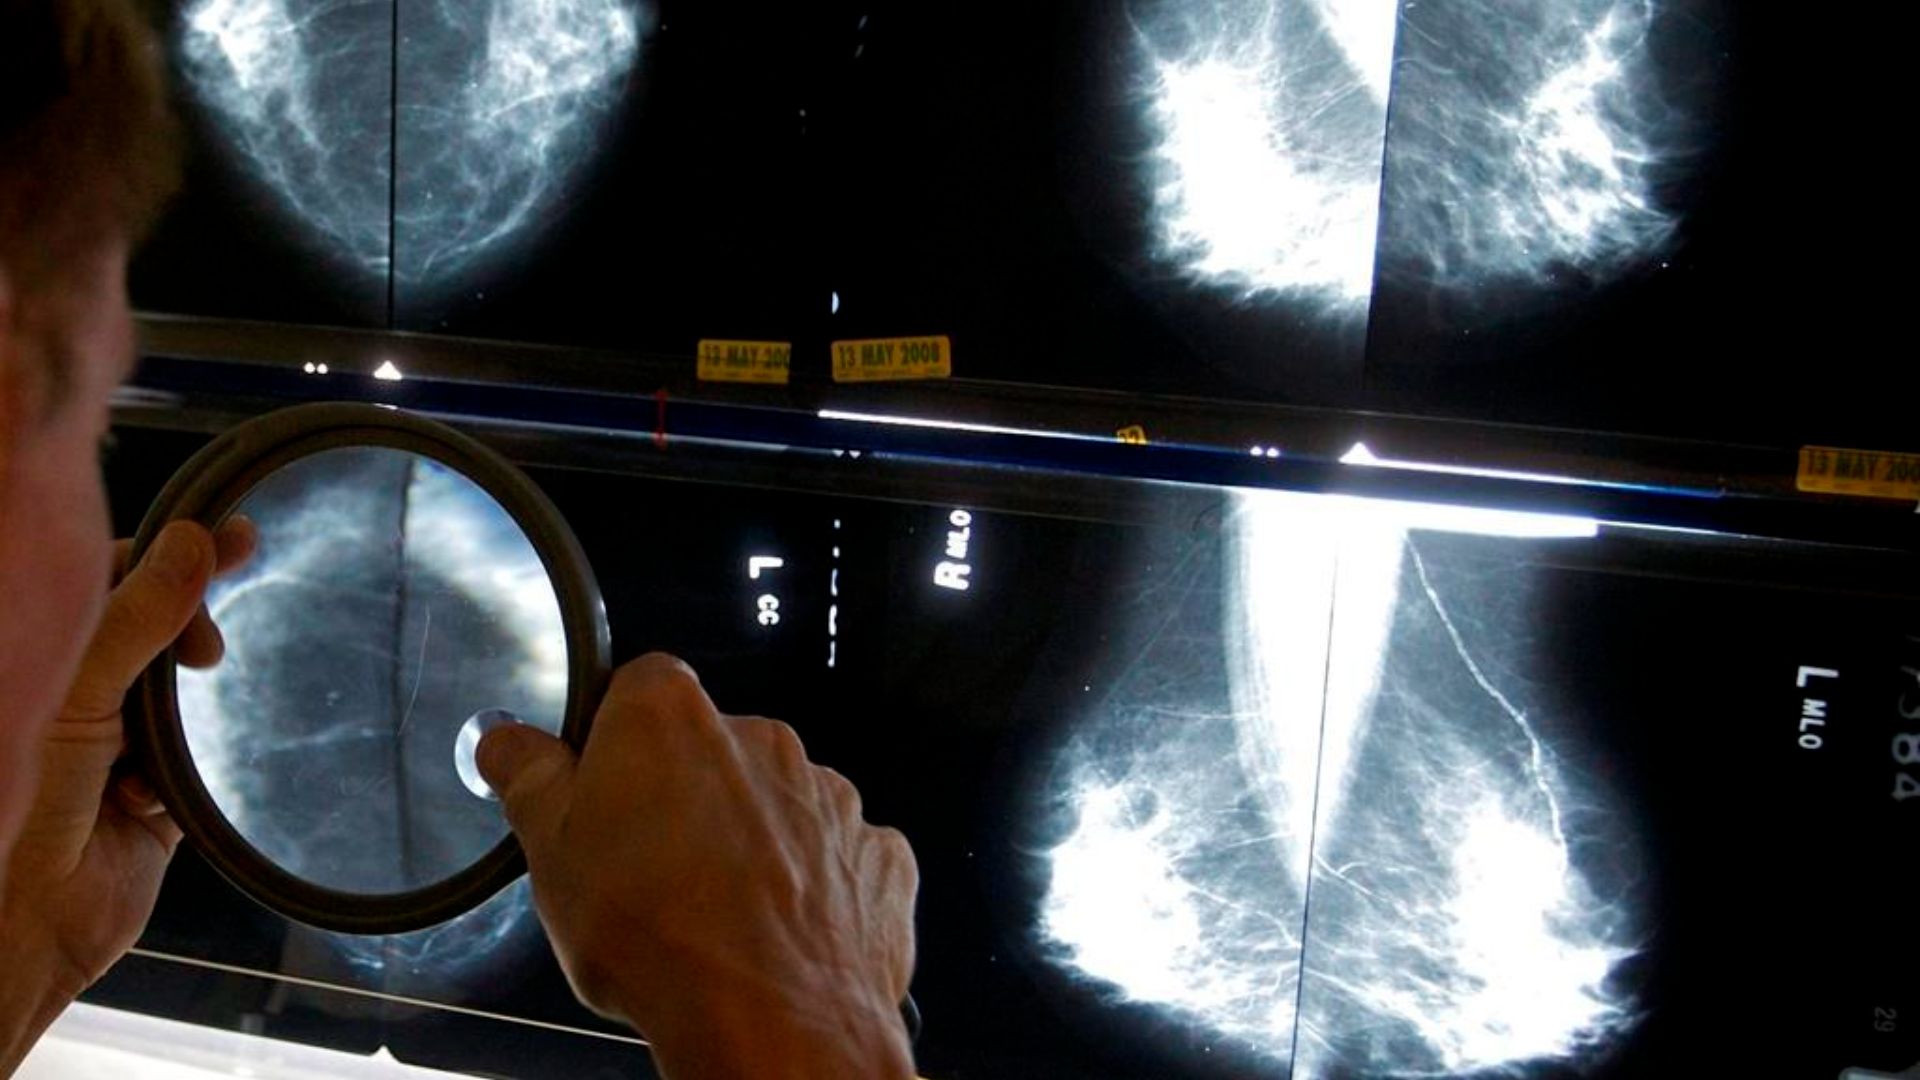 Canadian Cancer Society calls for breast cancer screening starting at age 40